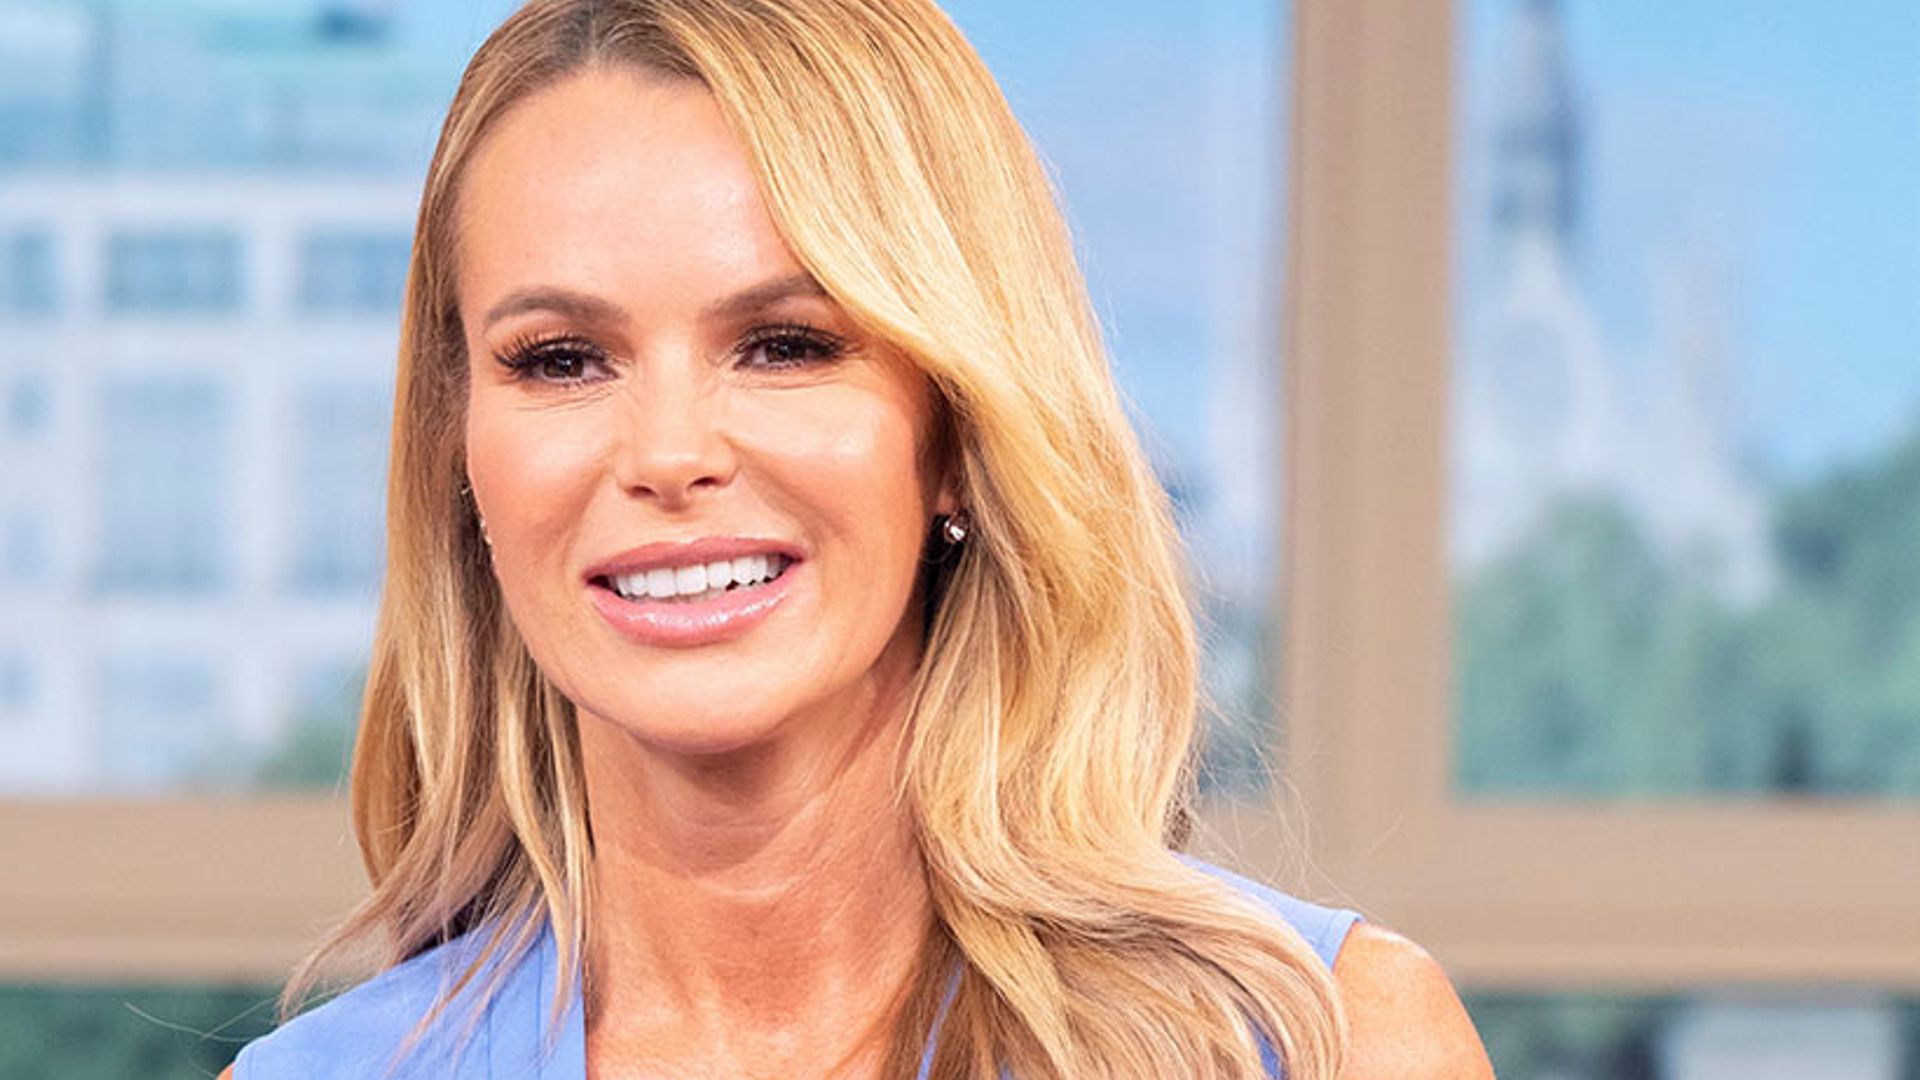 Everyone thinks Amanda Holden looks like Britney Spears in this incredible pink mini dress